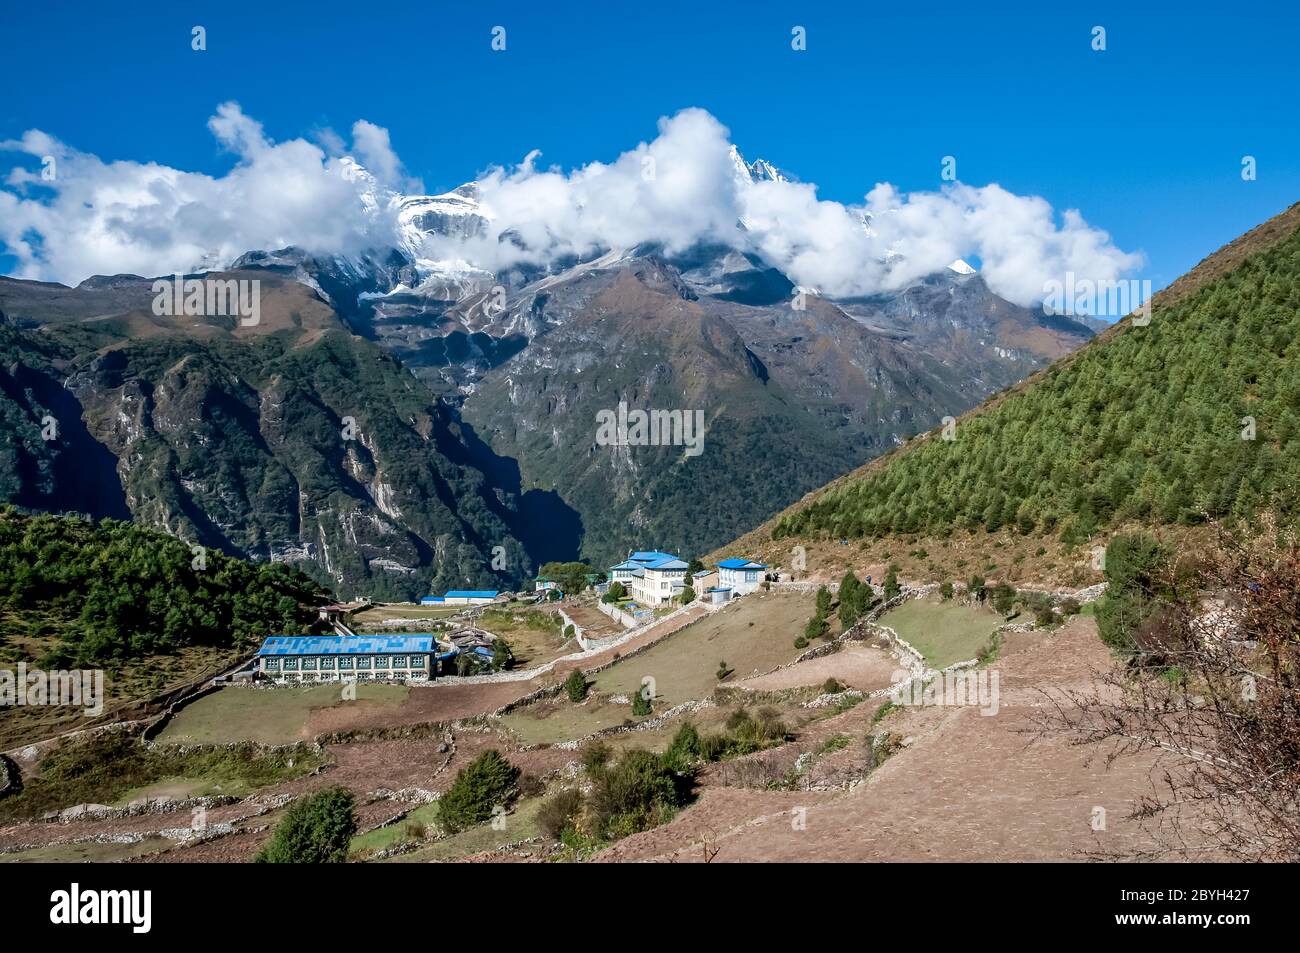 Nepal. Island Peak Trek. Colourful scenes in and around the Solu Khumbu overlooking the National Himalayan Museum and the sherpa  town of Namche Bazaar with the sacred mountain of Kumbila in the clouds Stock Photo